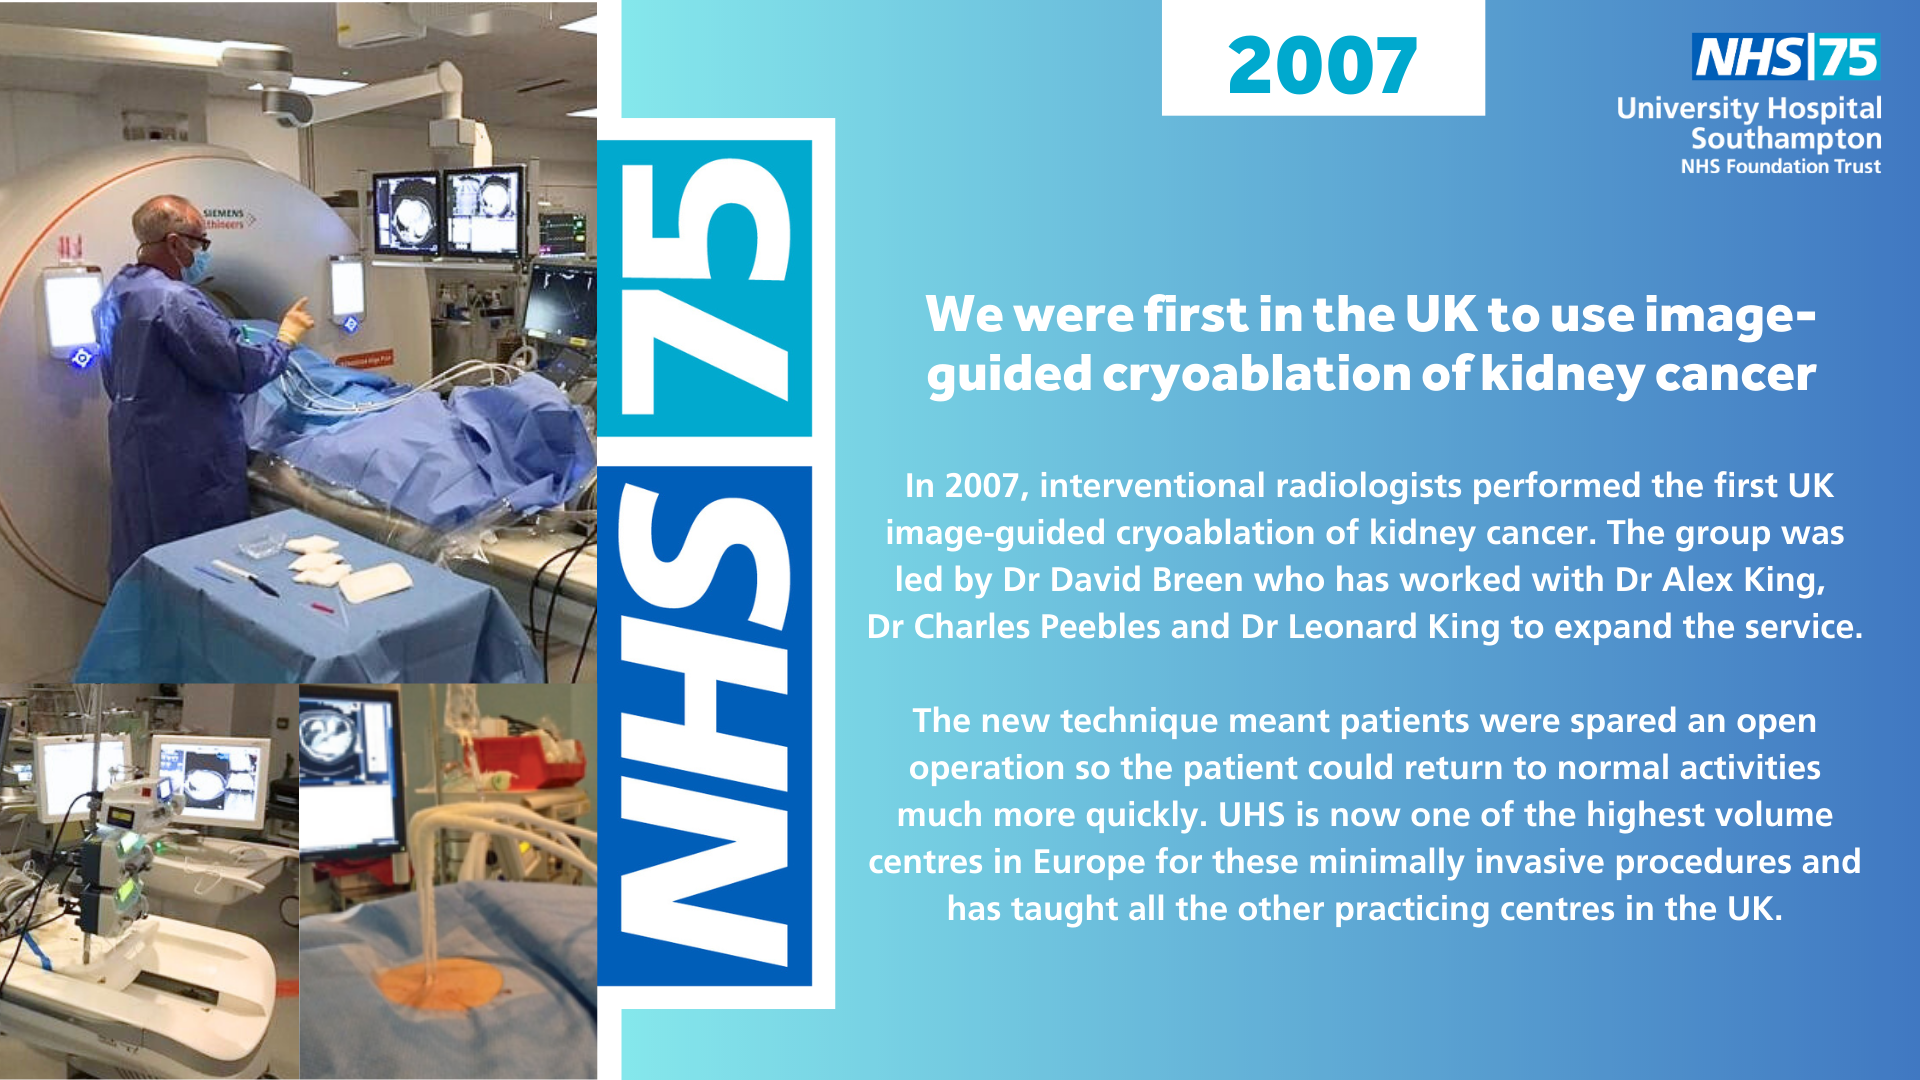 We were first in the UK to use cryoablation of kidney cancer